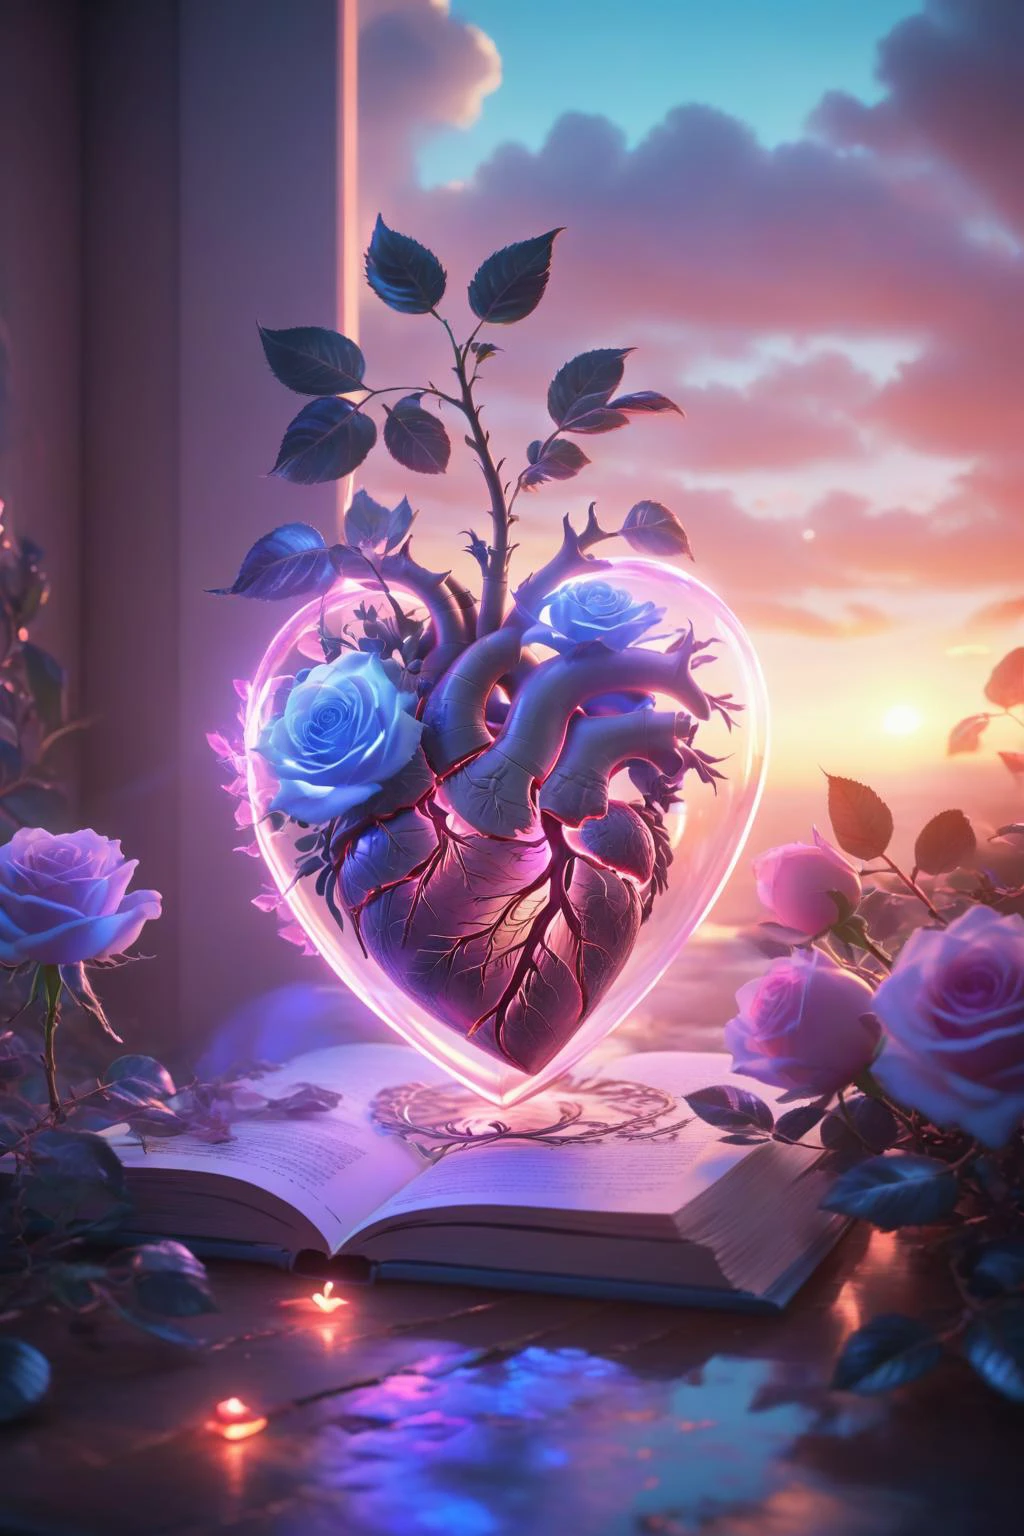 Digital Art,Concept Art,octane rendering,unreal engine,dreamlike scenes,delicate and rich light and color,superb light and shadow effects and color matching,aesthetic and romantic,Surrealistic,magical,fantasist,fantastic,Ornate And Intricate,unimaginable beauty,
A glowing [pink|purple] rose and some glowing blue plants in a transparent (heart-shaped:1.5) glass container,
this container in a love story book,extremely romantic mood,nostalgic atmosphere,gentle light and lingering composition,depth of field,letitflrsh,Dream Scenery,a glowing neon-colored heart pattern,